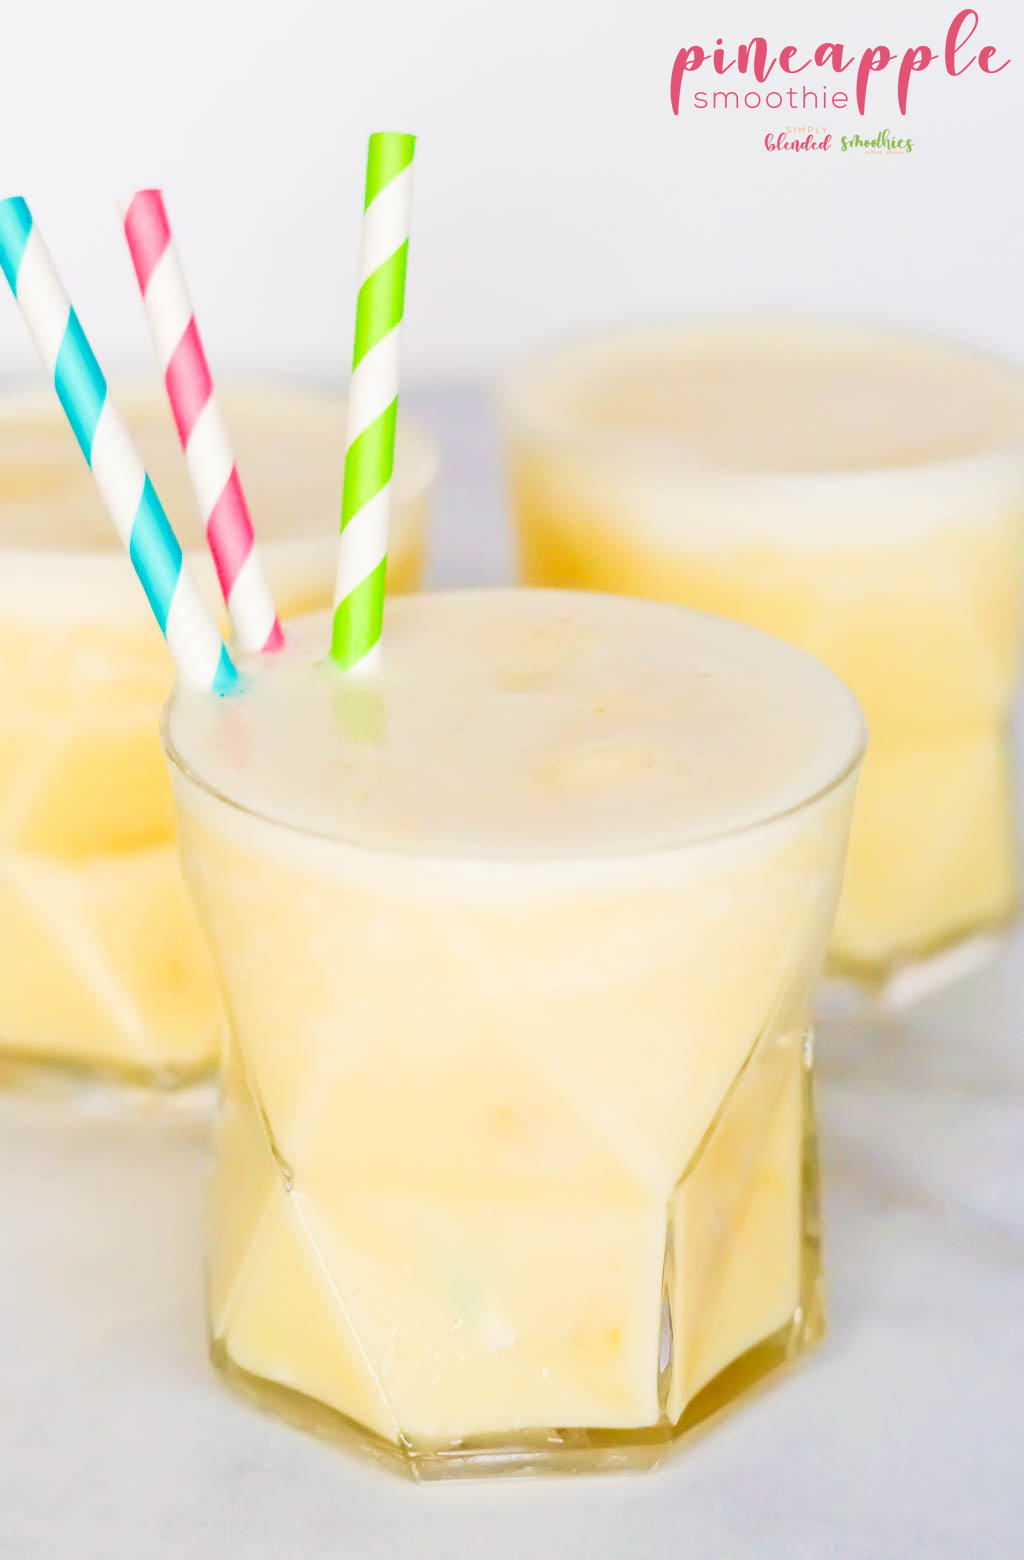 Pineapple Smoothie - With A Few Ingredients That Are Easy To Keep On Hand, You Can Make This Deliciously Refreshing Pineapple Smoothie And Feel Like You'Re Sitting At The Beach